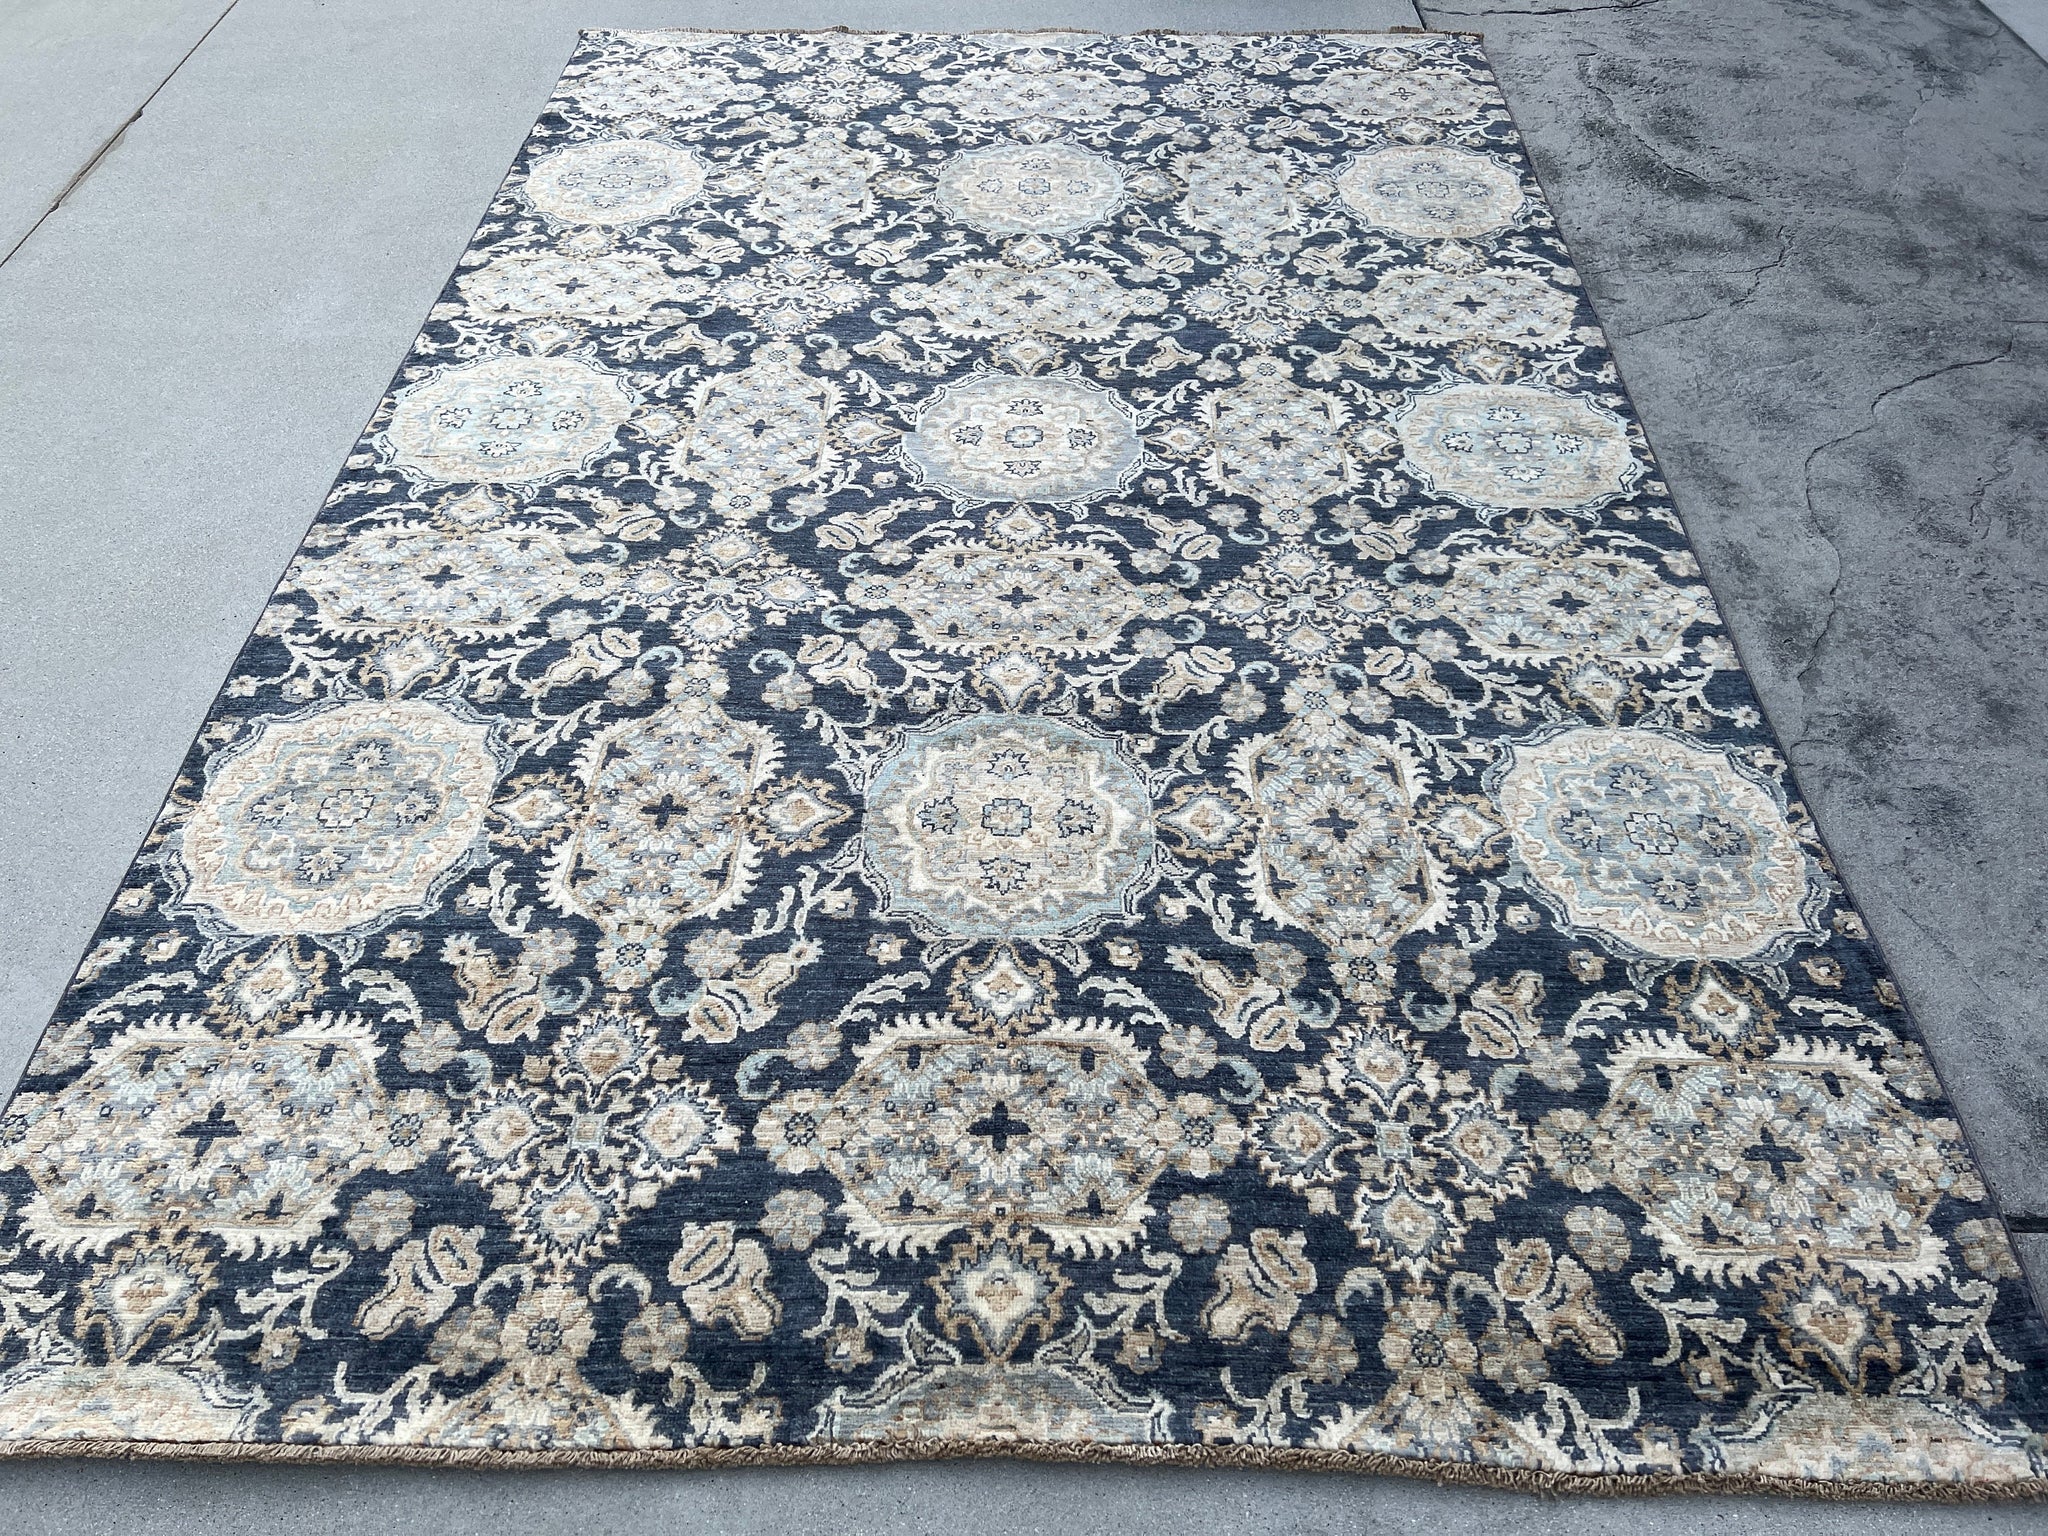 6x9 (180x275) Hand Knotted Handmade Afghan Rug | Charcoal Black Teal Beige Cream Gold Yellow Brown | Tribal Oriental Floral